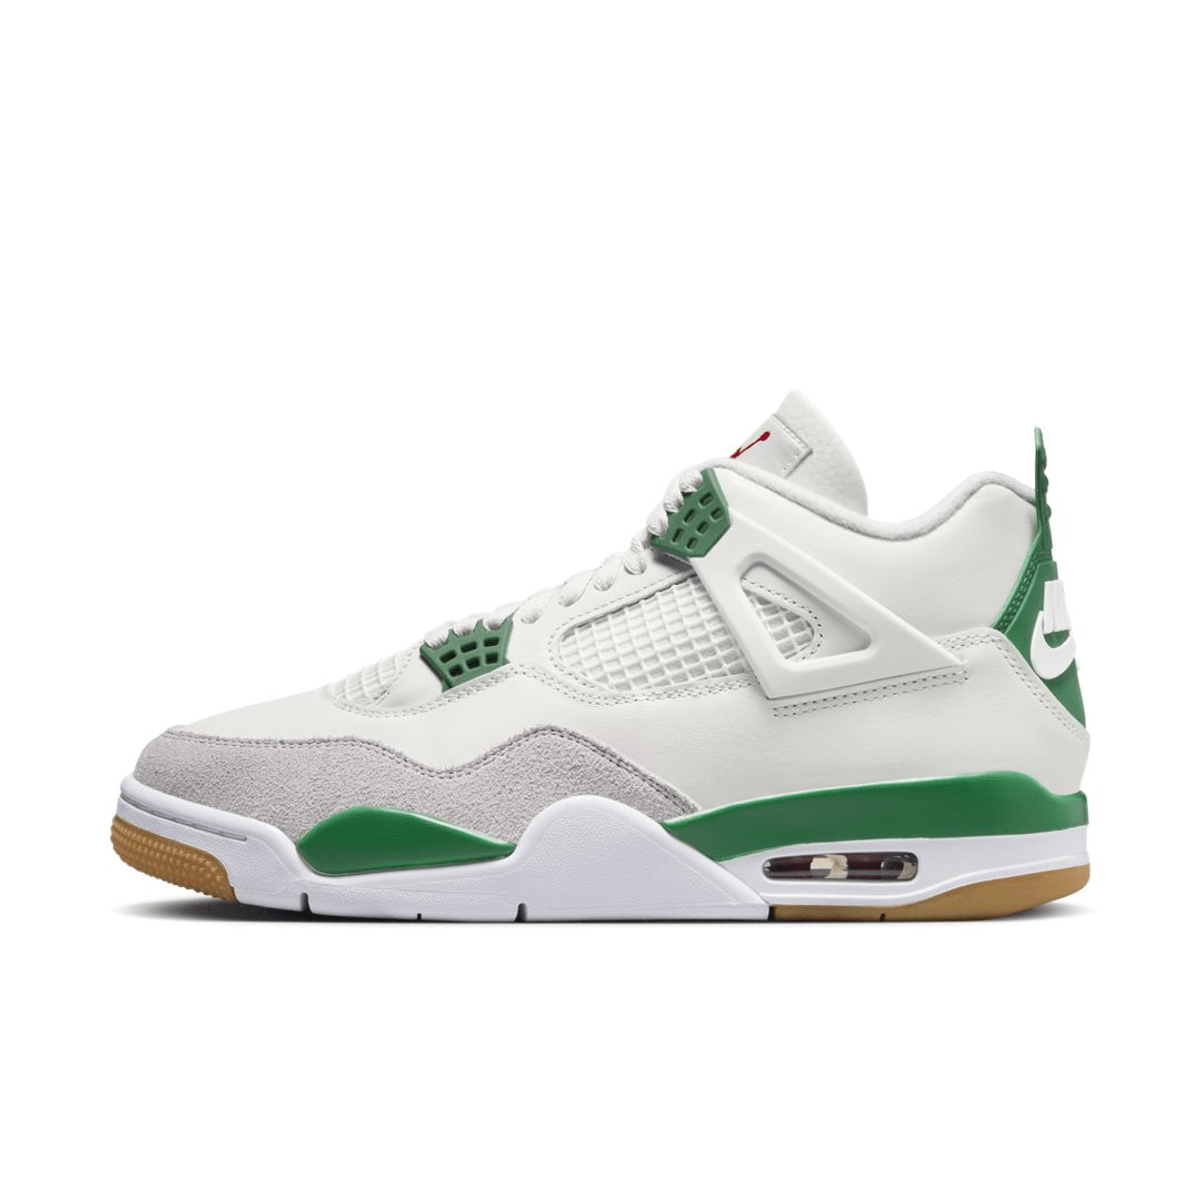 Watch For Exclusive Access for the Air Jordan 4 x Nike SB Pine Green on May 25th